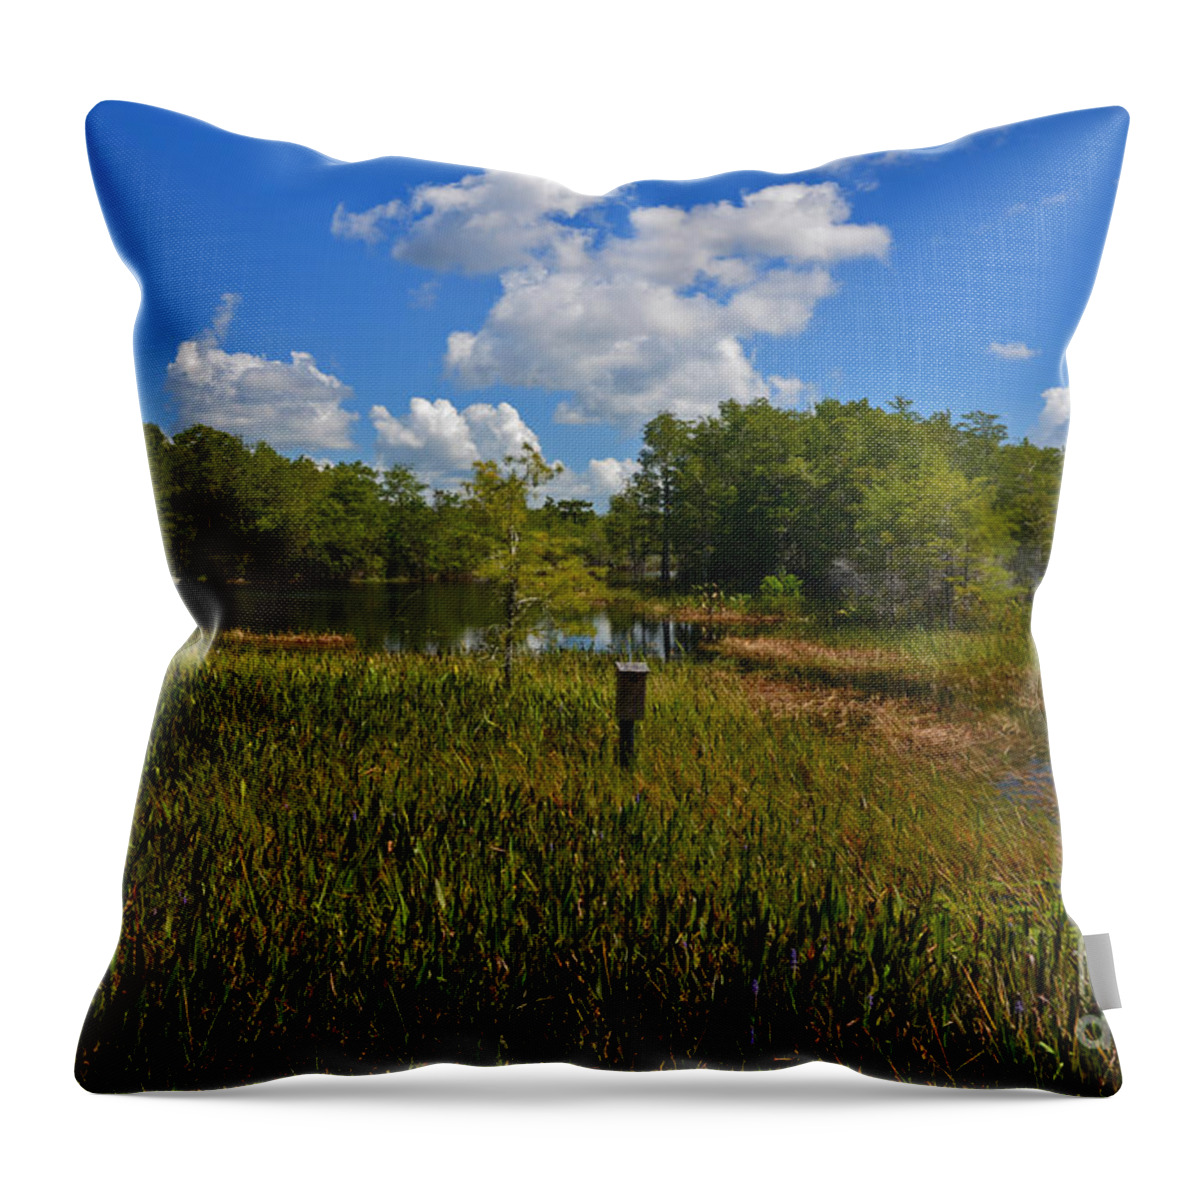  Throw Pillow featuring the photograph 13- Florida Everglades by Joseph Keane